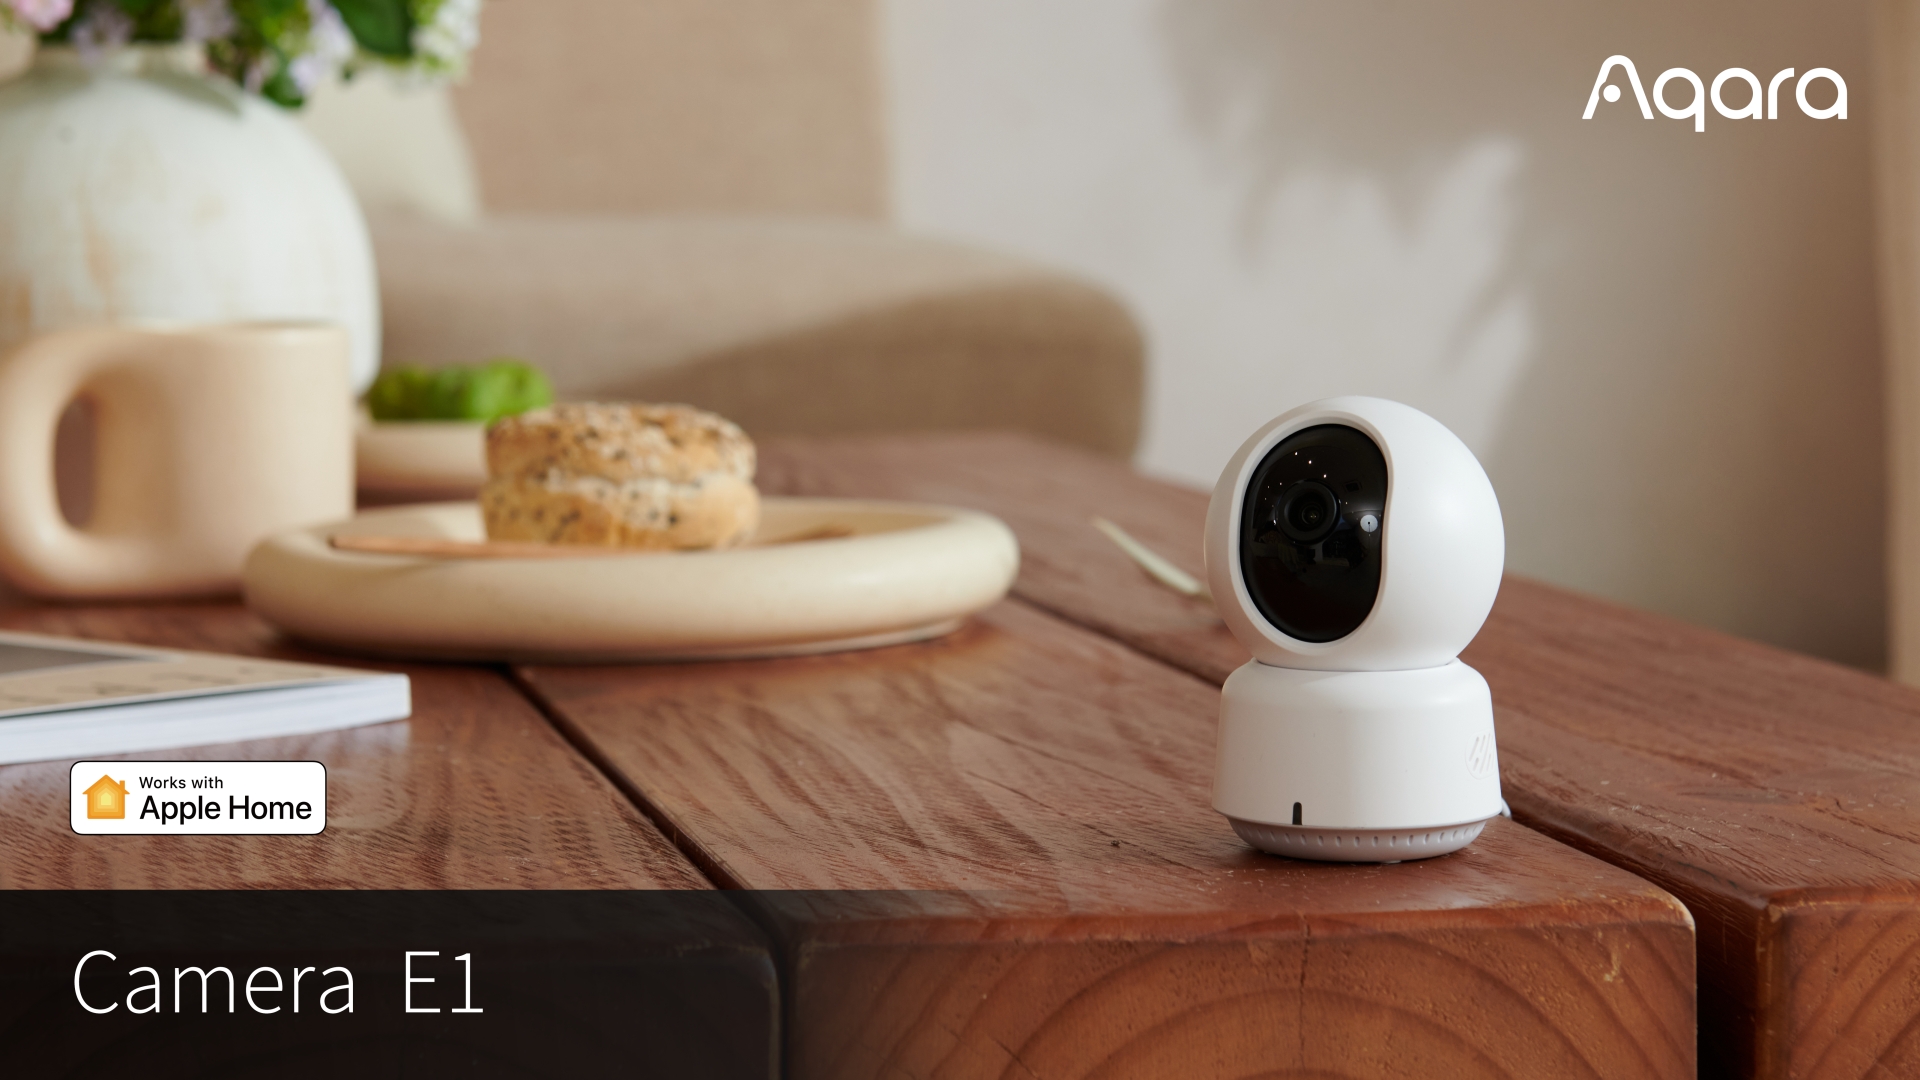 Review: Aqara's Camera E1 Offers 2K and Pan and Tilt With HomeKit Secure Video Support for $60